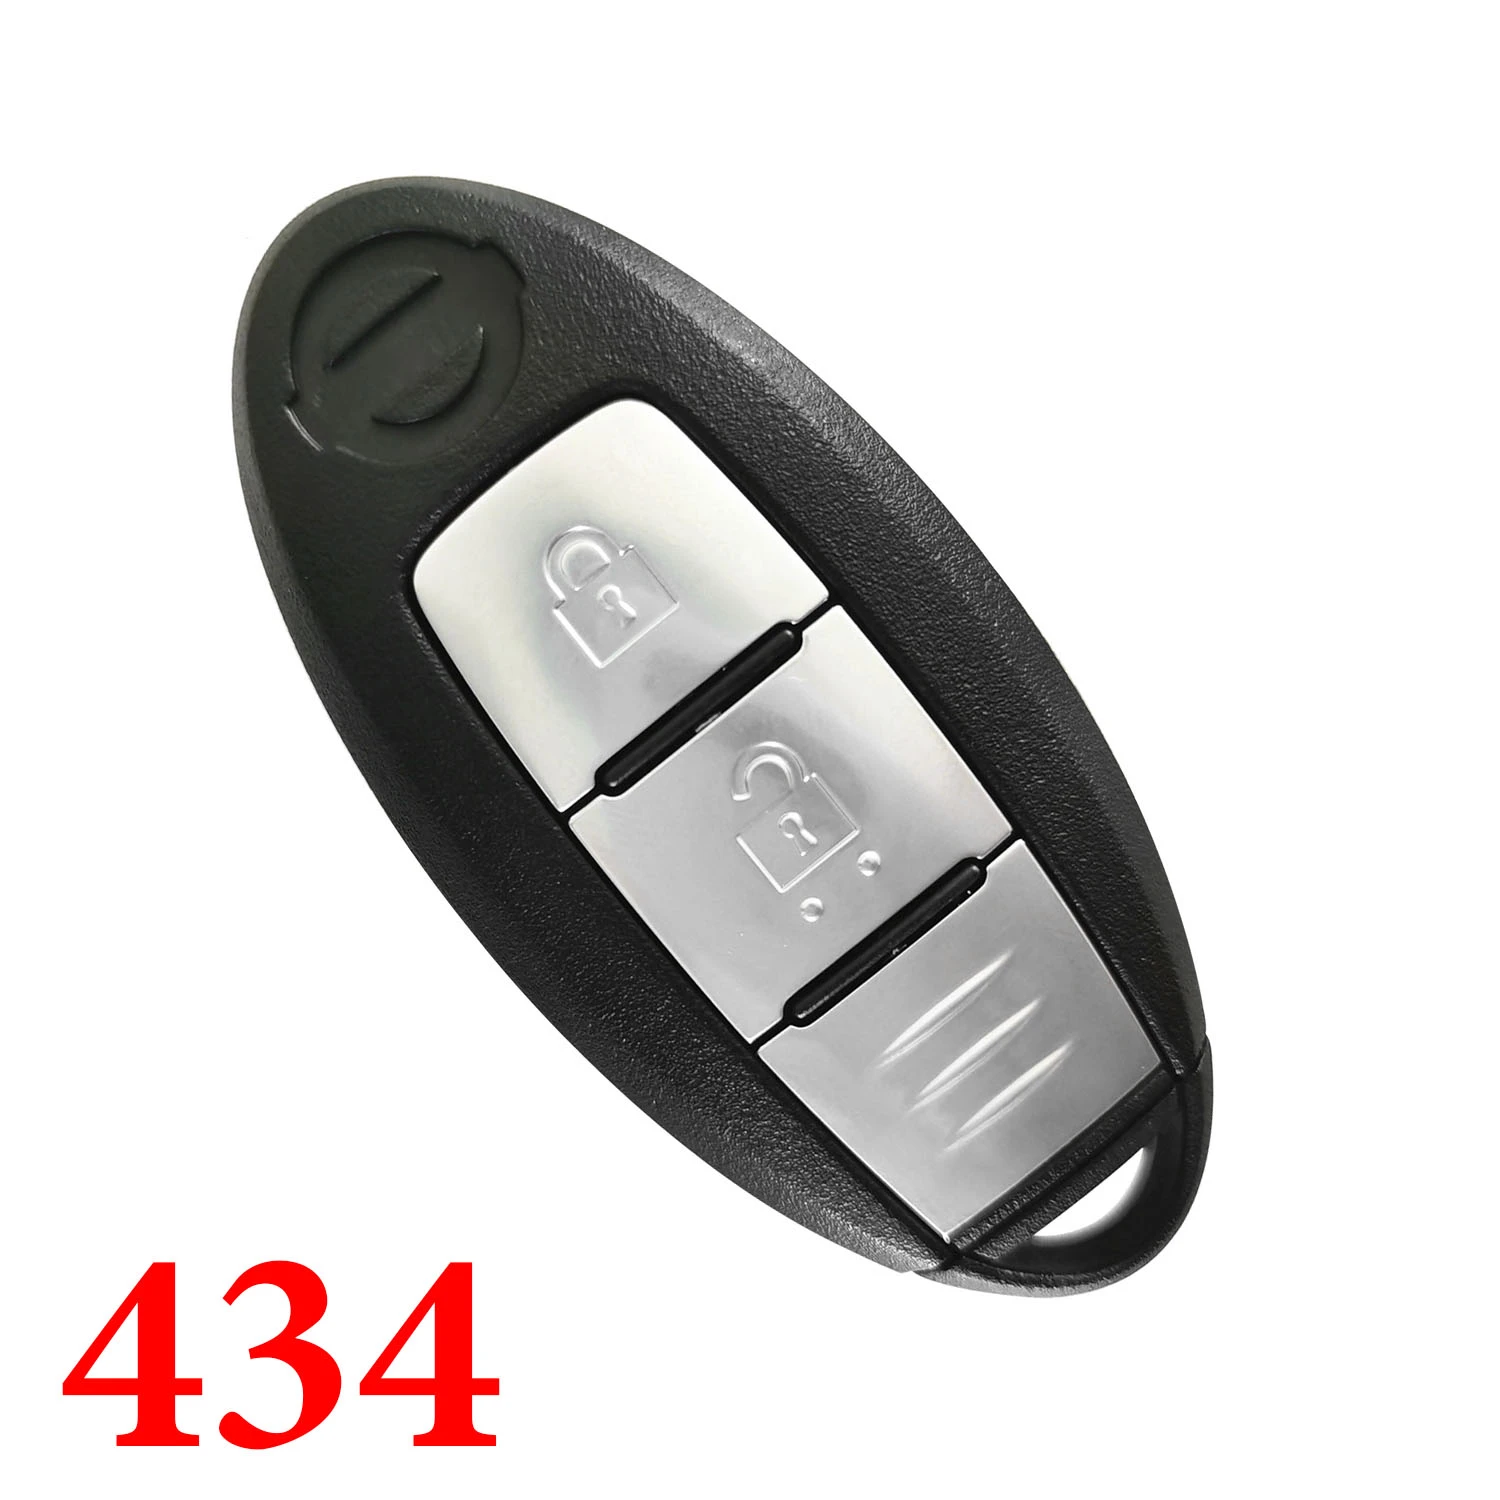 434 MHz Smart Key Fob for N-issan Micra Juke Note / for R-enault Alaska - CWTWB1U825 spark plugs and wires